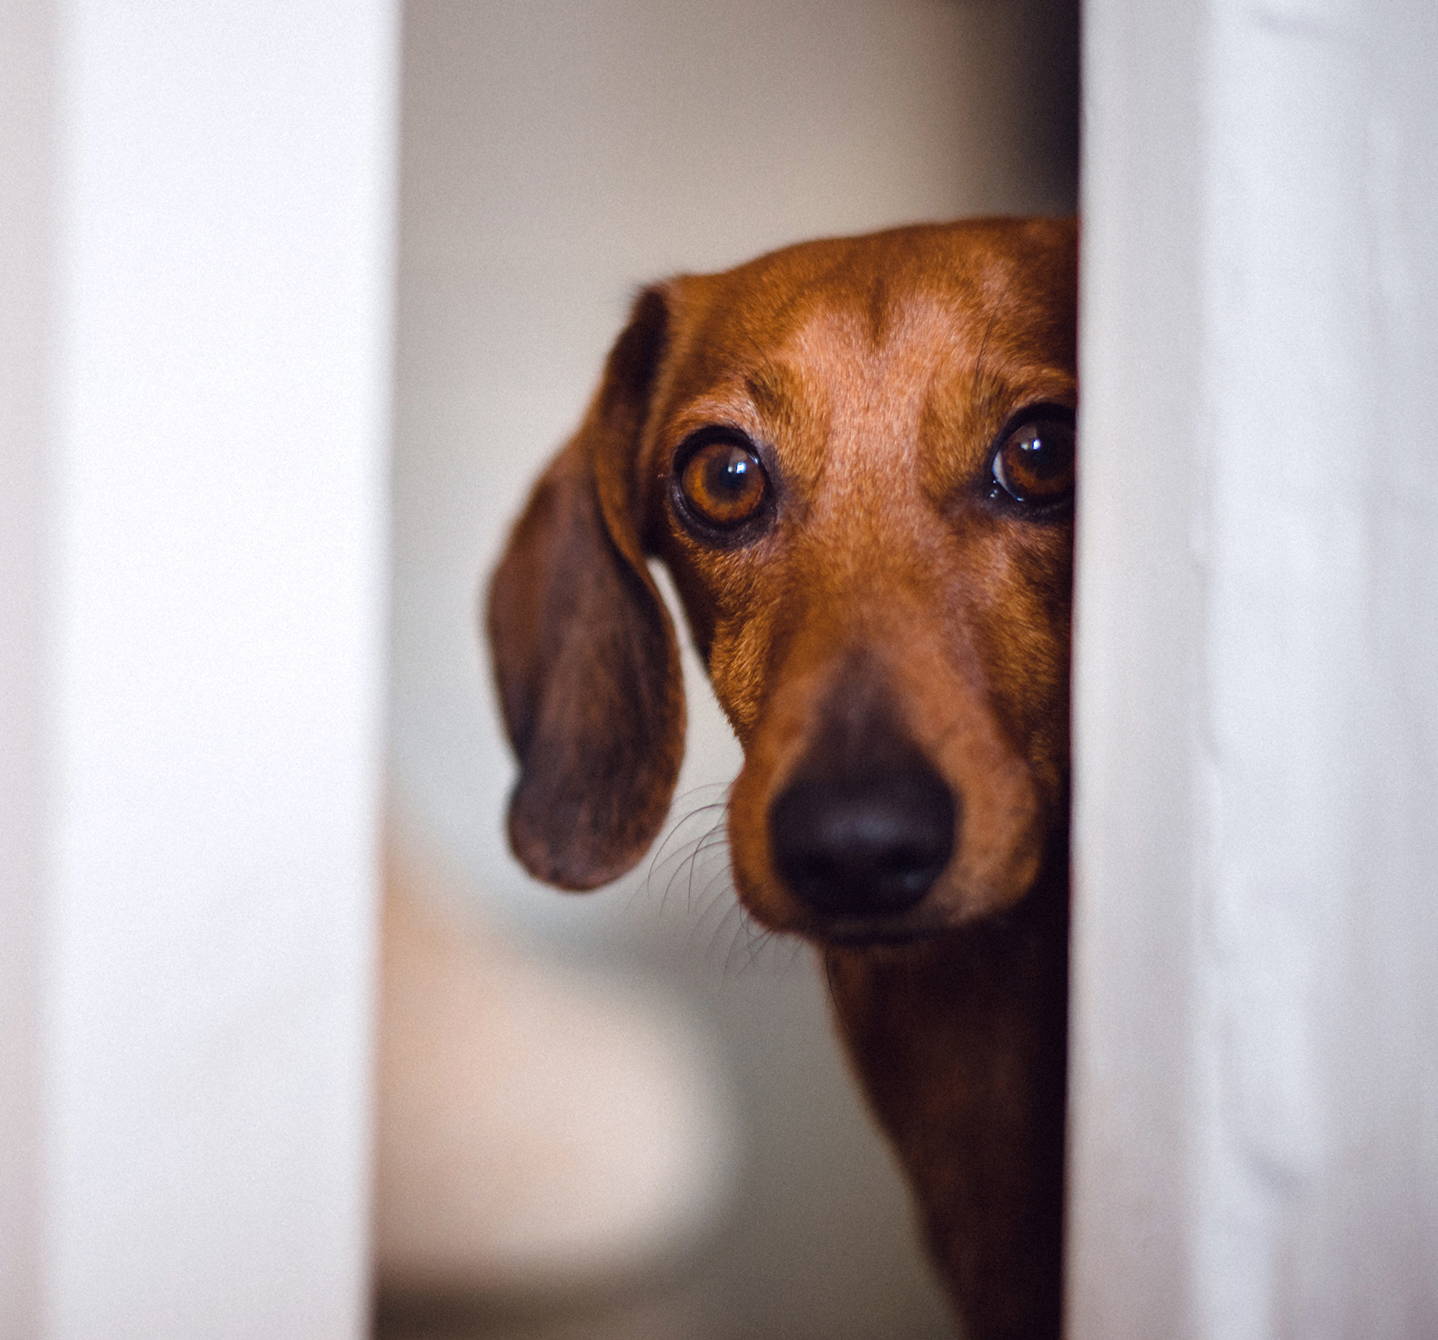 Allergic to dogs? This little brown dachshund, peeping round the door, could give you a runny nose and the sniffles.